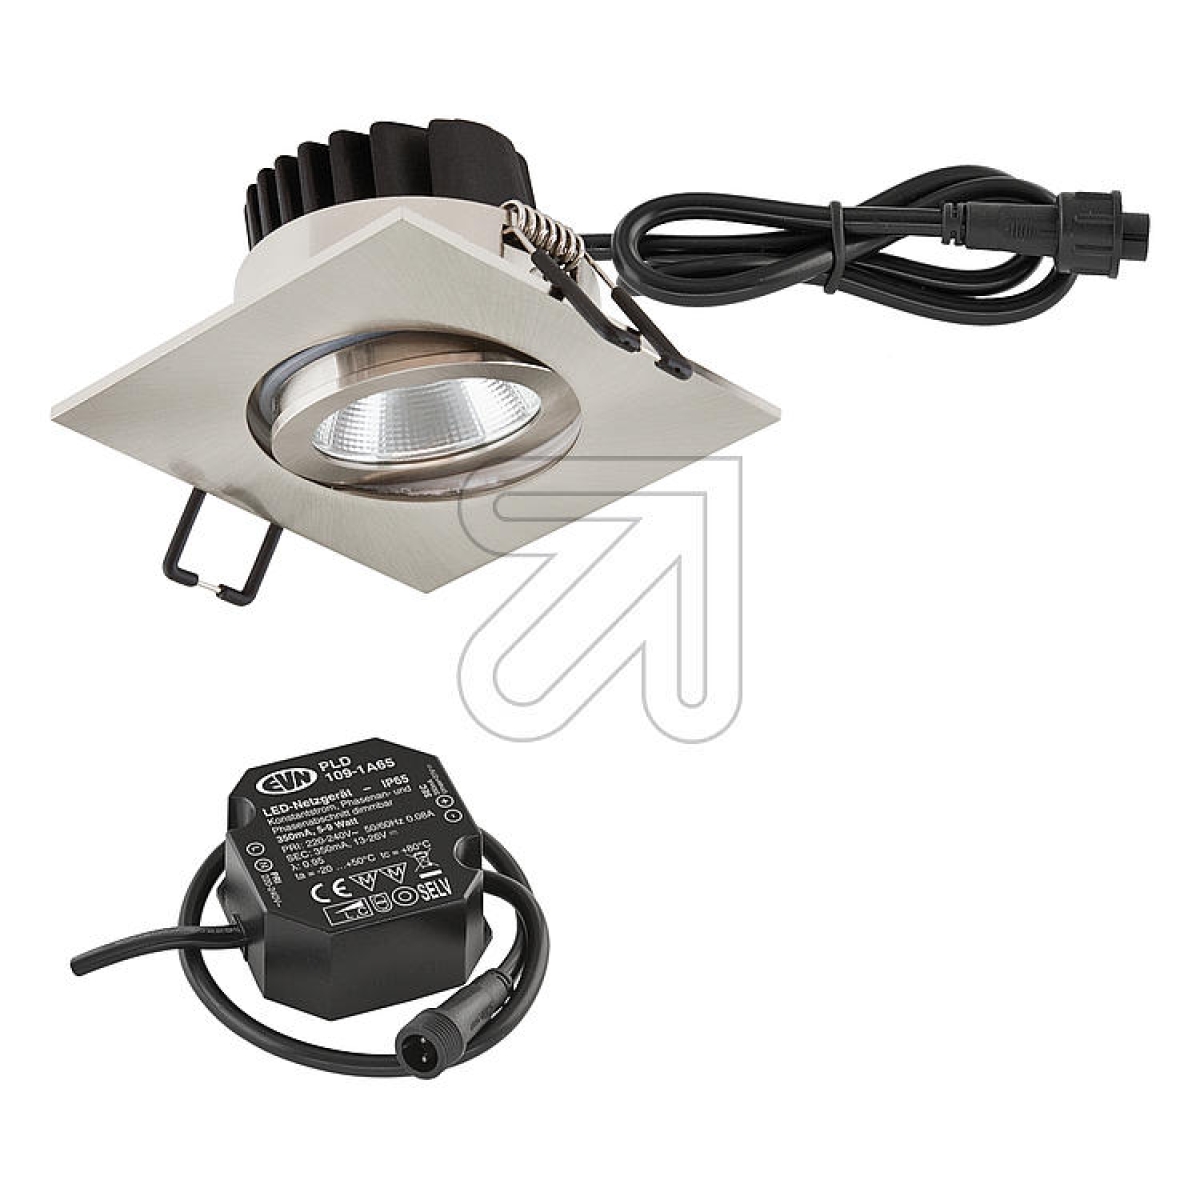 EVNLED recessed light stainless steel look IP65 3000K 8.4W PC654N91302Article-No: 686540